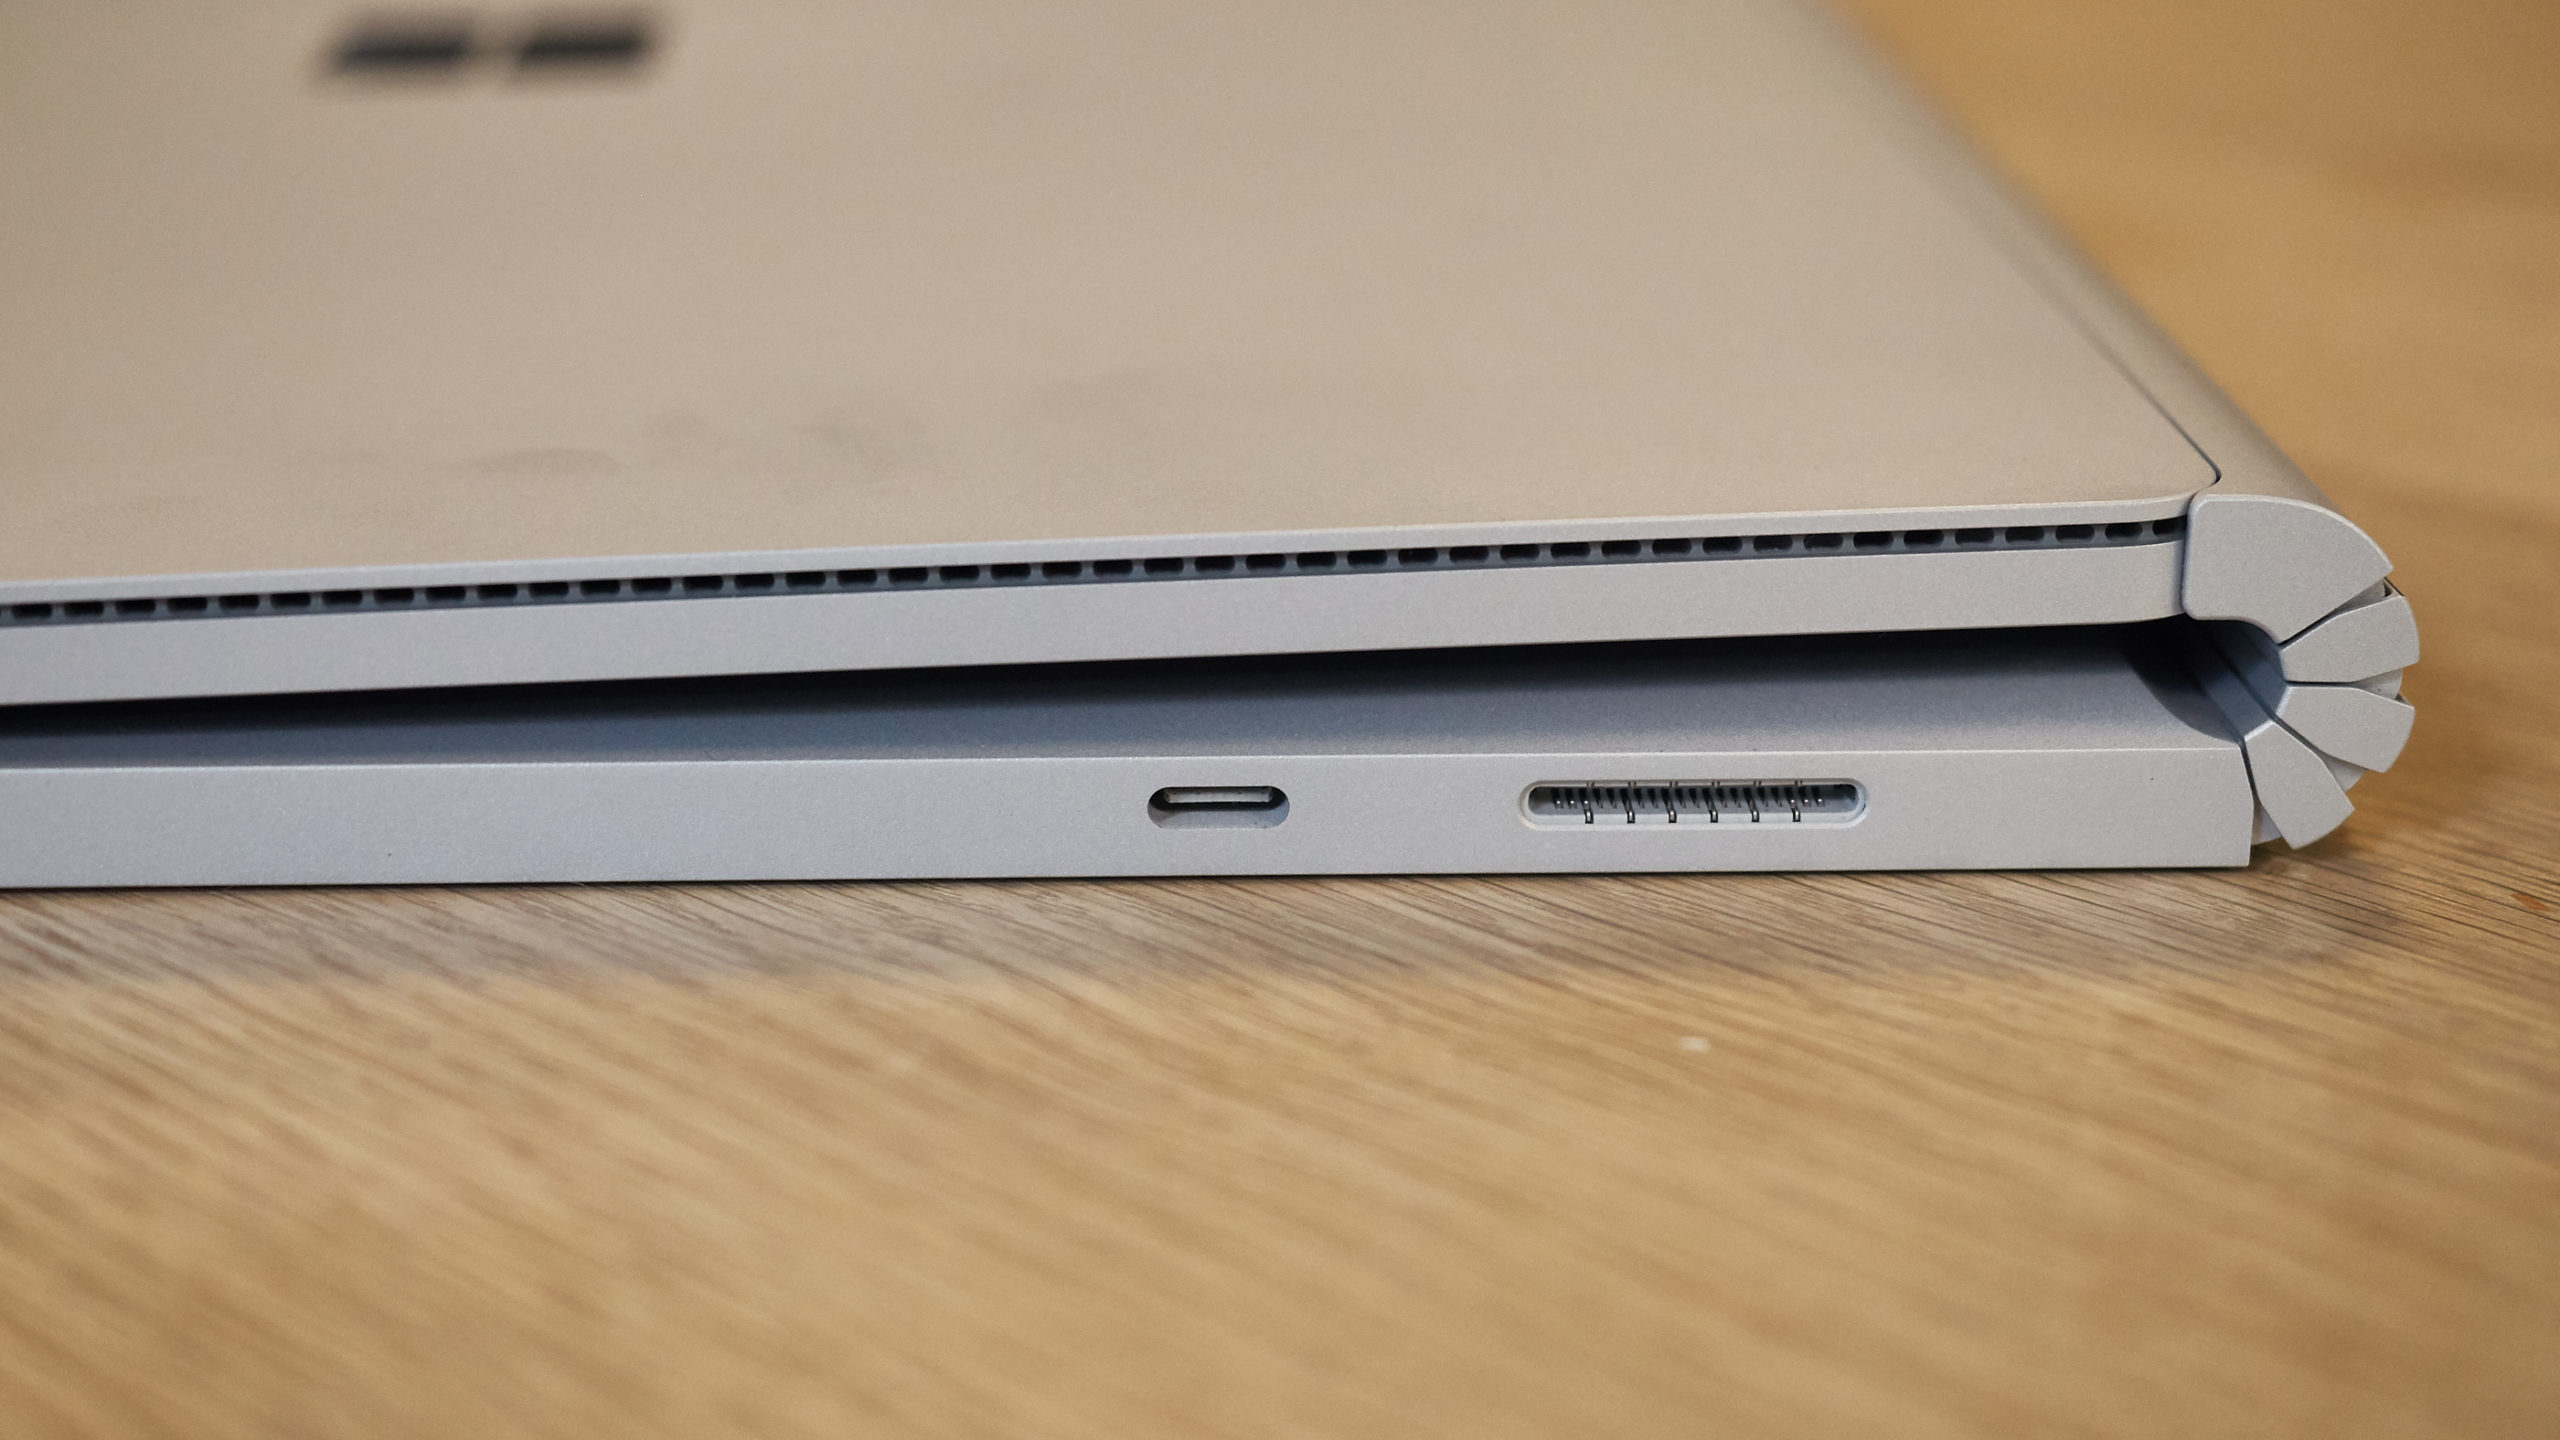 Review: Microsoft Surface Book 2